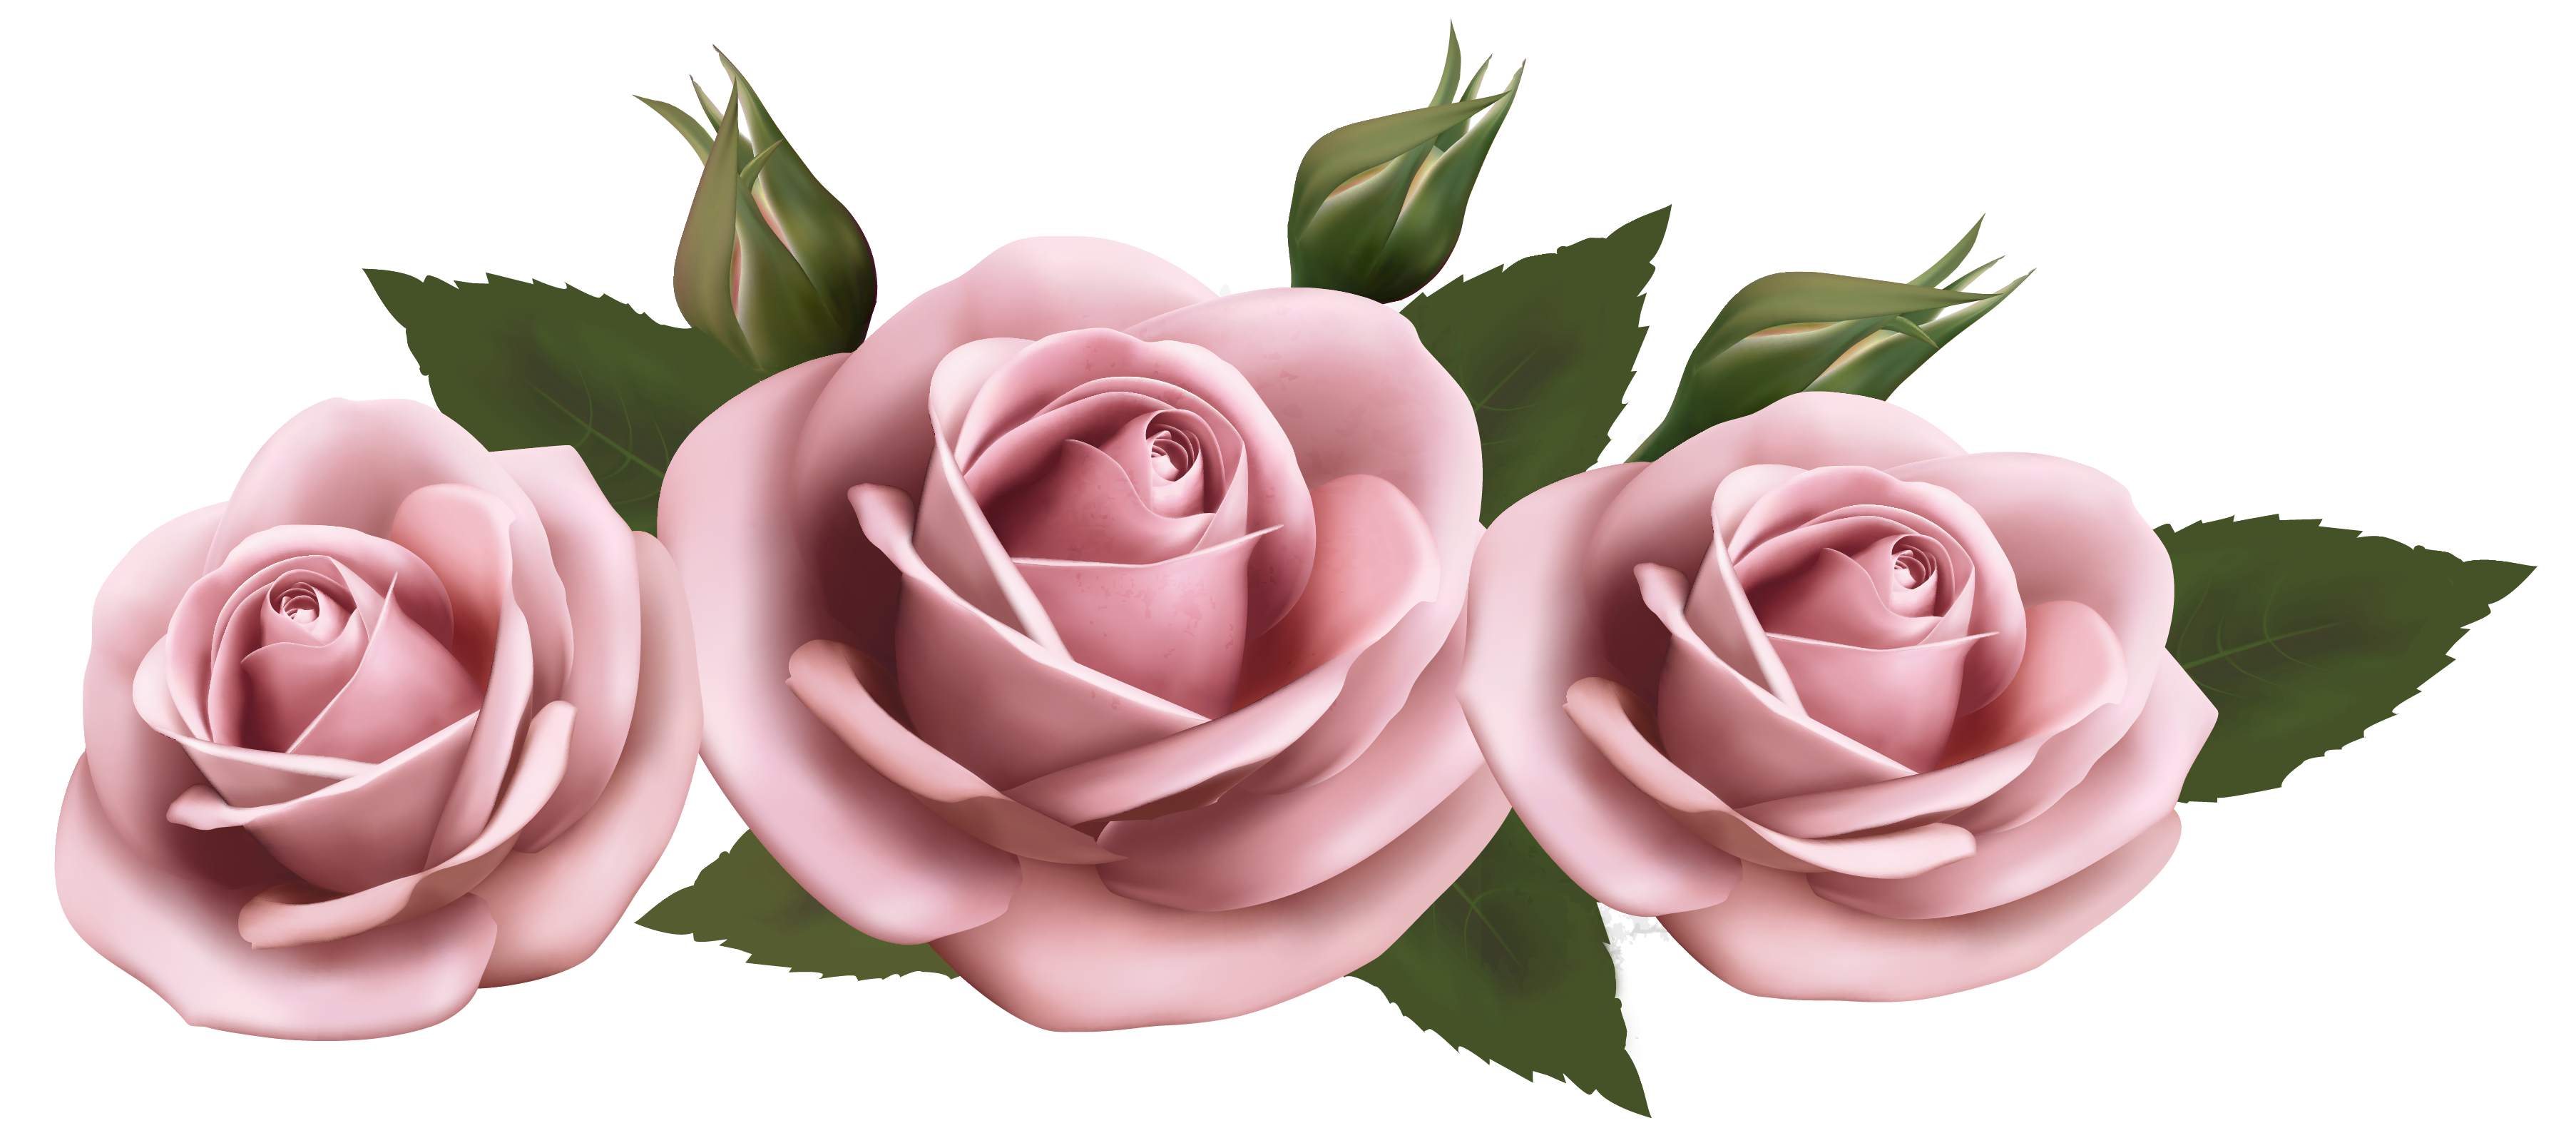 Beautiful Transparent Pink Roses PNG Picture | Gallery Yopriceville ...